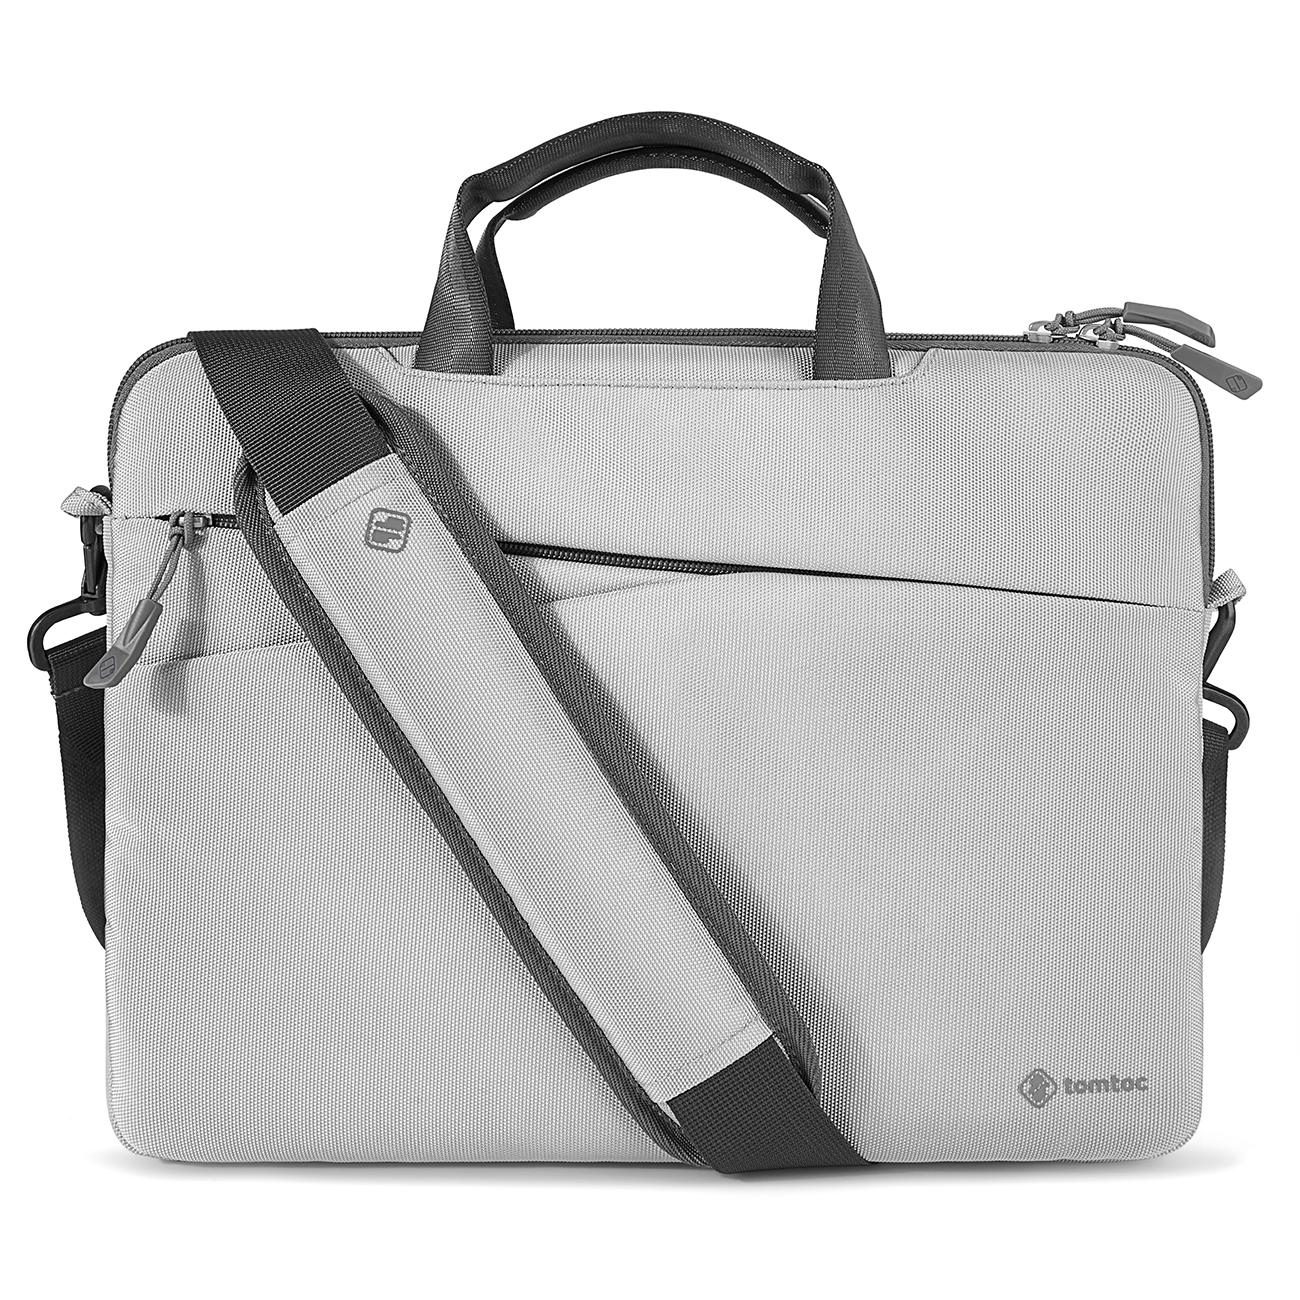 tui-xach-tui-deo-vai-tomtoc-usa-messenger-bags-for-macbook-13-14-ultrabook-13-a4